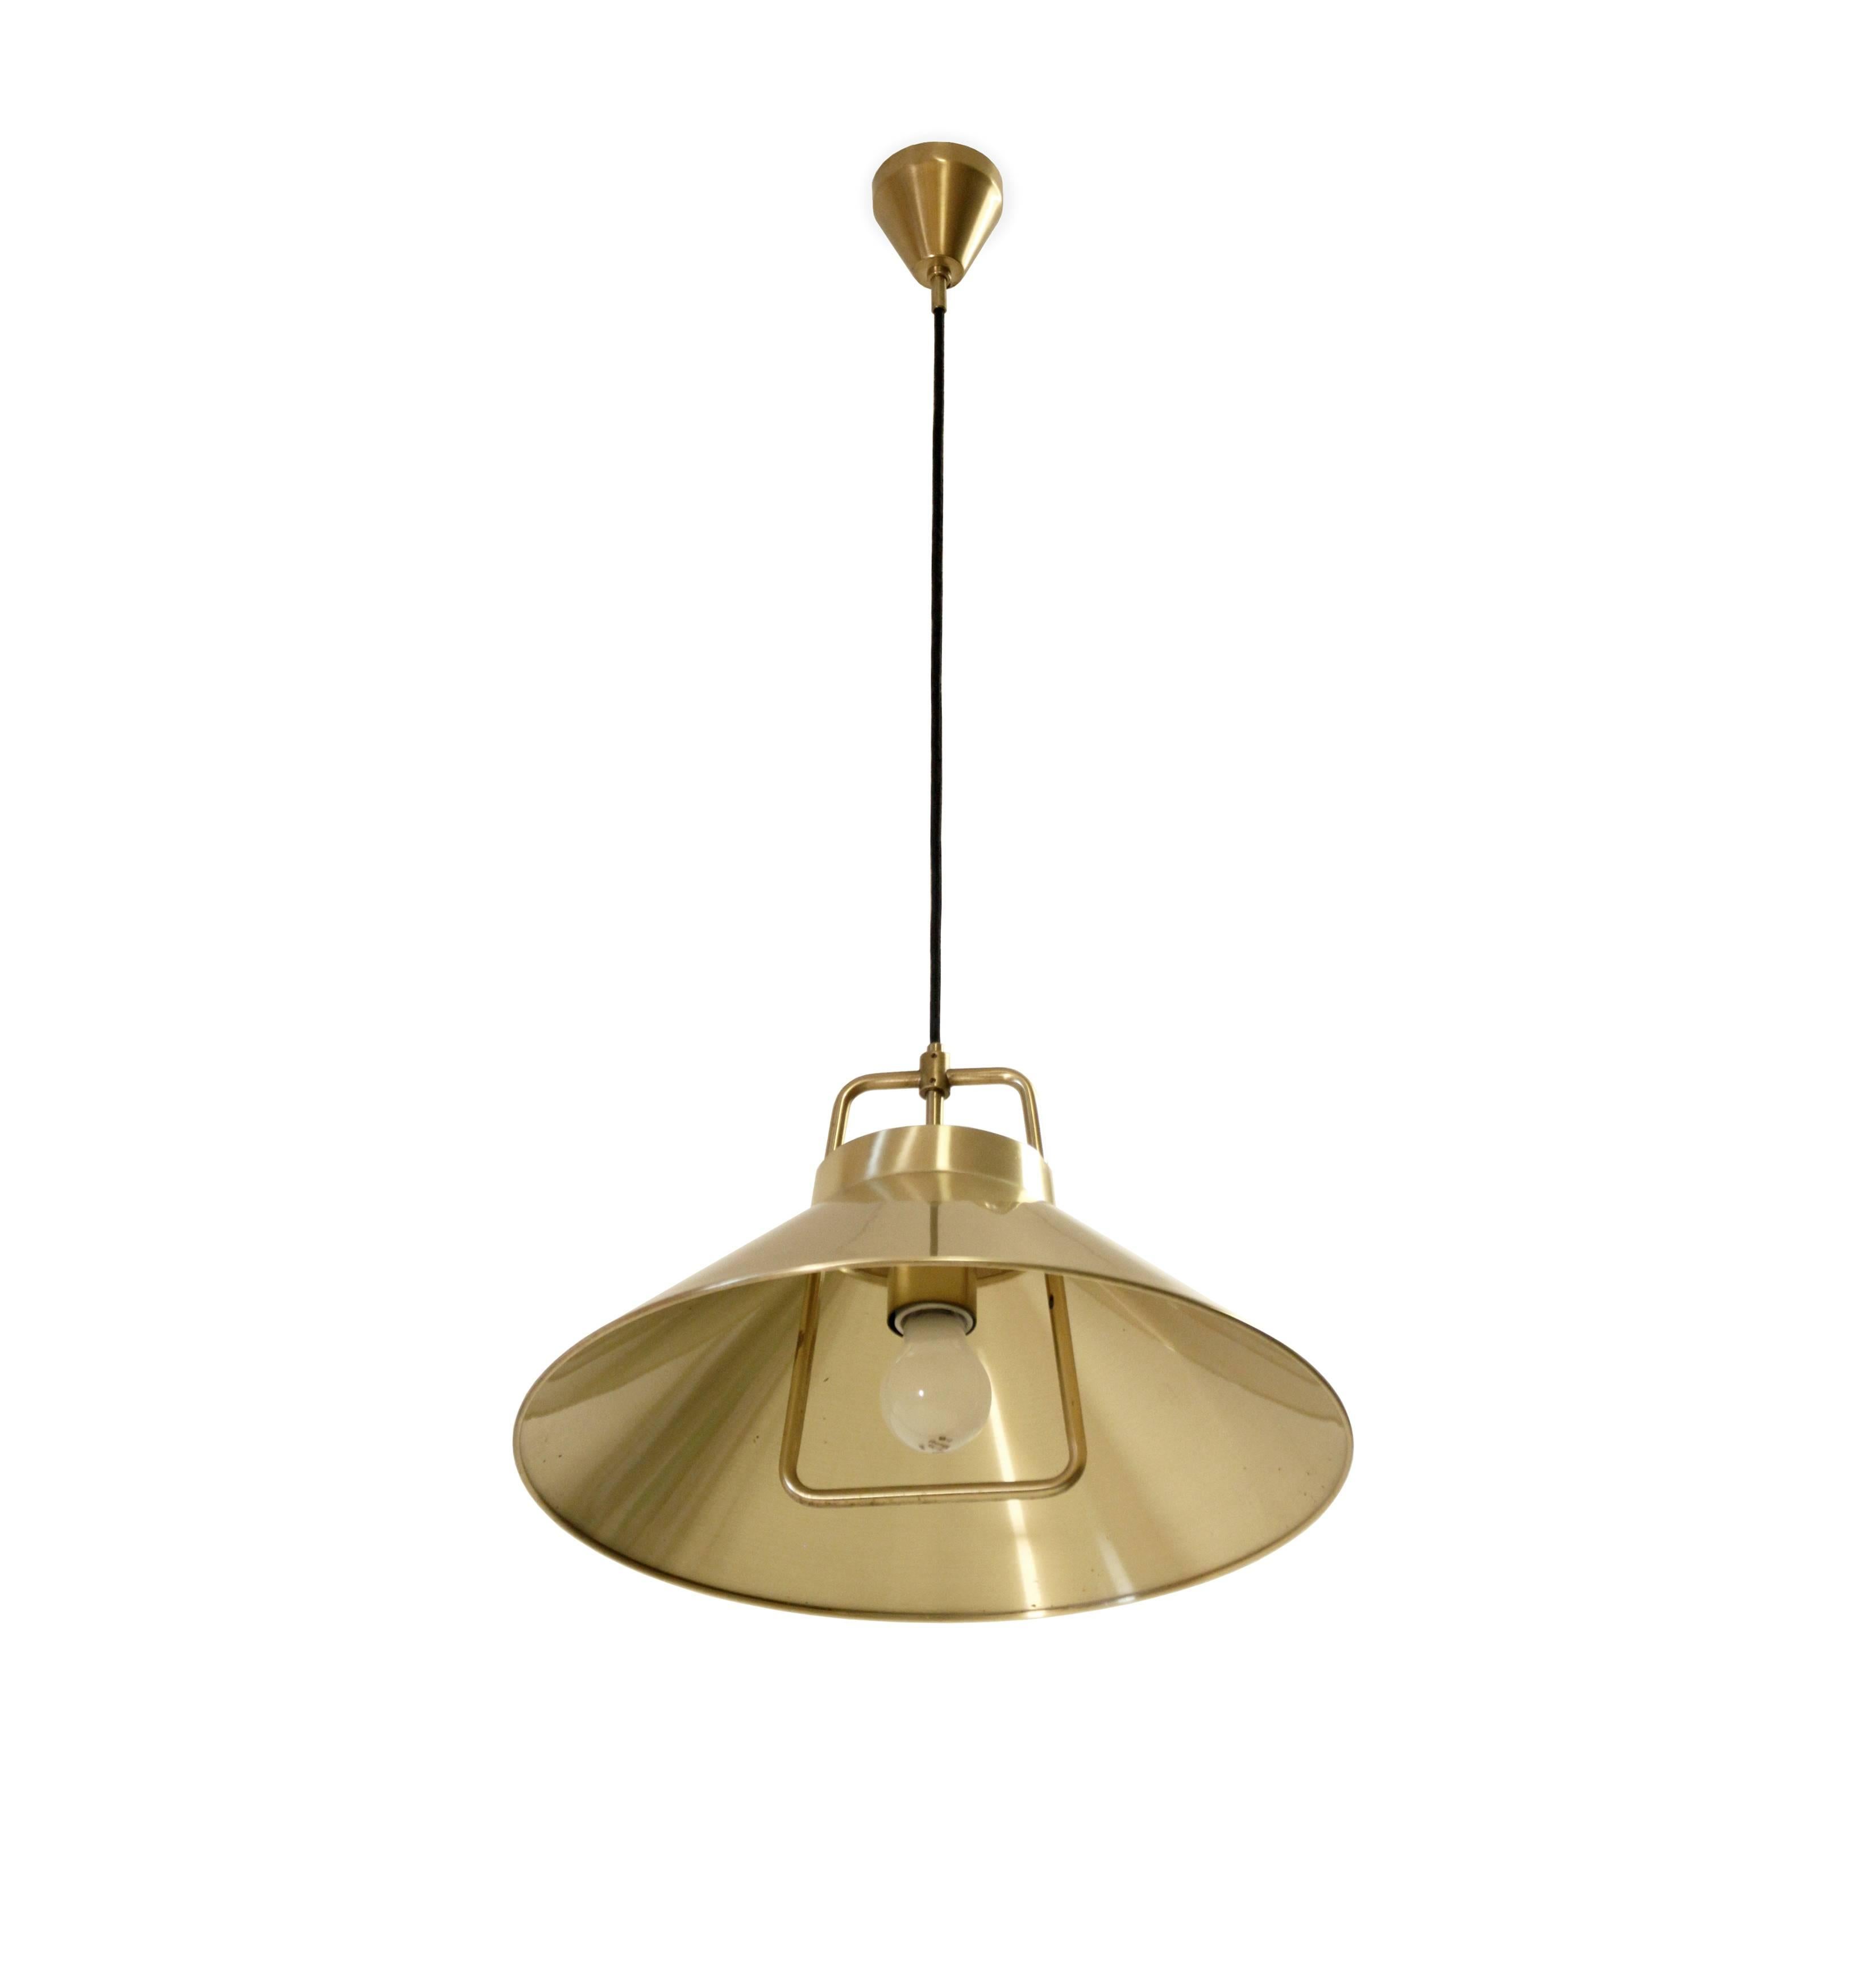 Circular ceiling light on a brass frame. Designed and made in Denmark by Lyfa from circa 1970 first half. The lamp is fully working and in very good vintage condition.